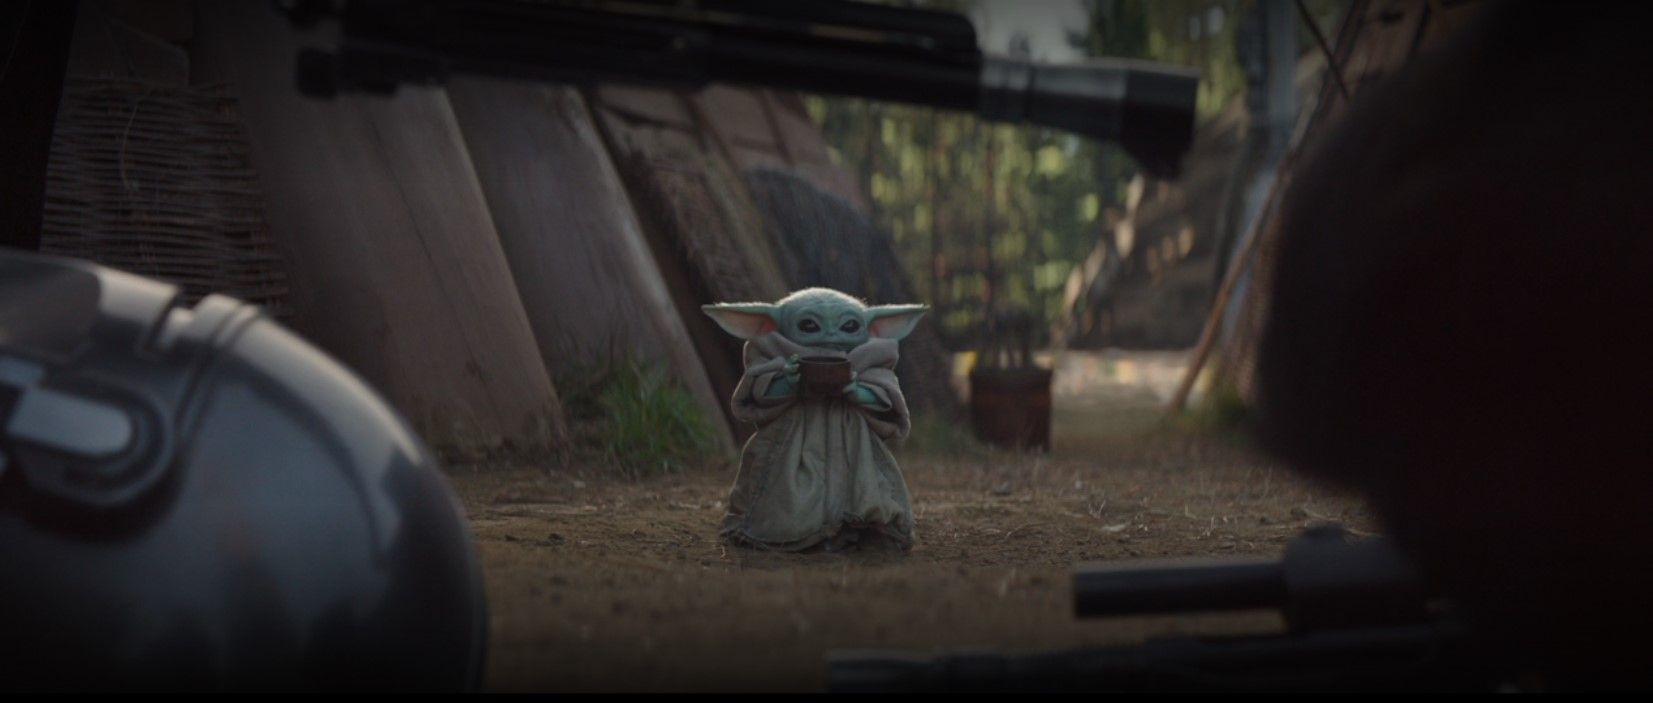 There's a NEW Baby Yoda Plush in Disney World's Galaxy Edge It May Be Our Favorite Yet!